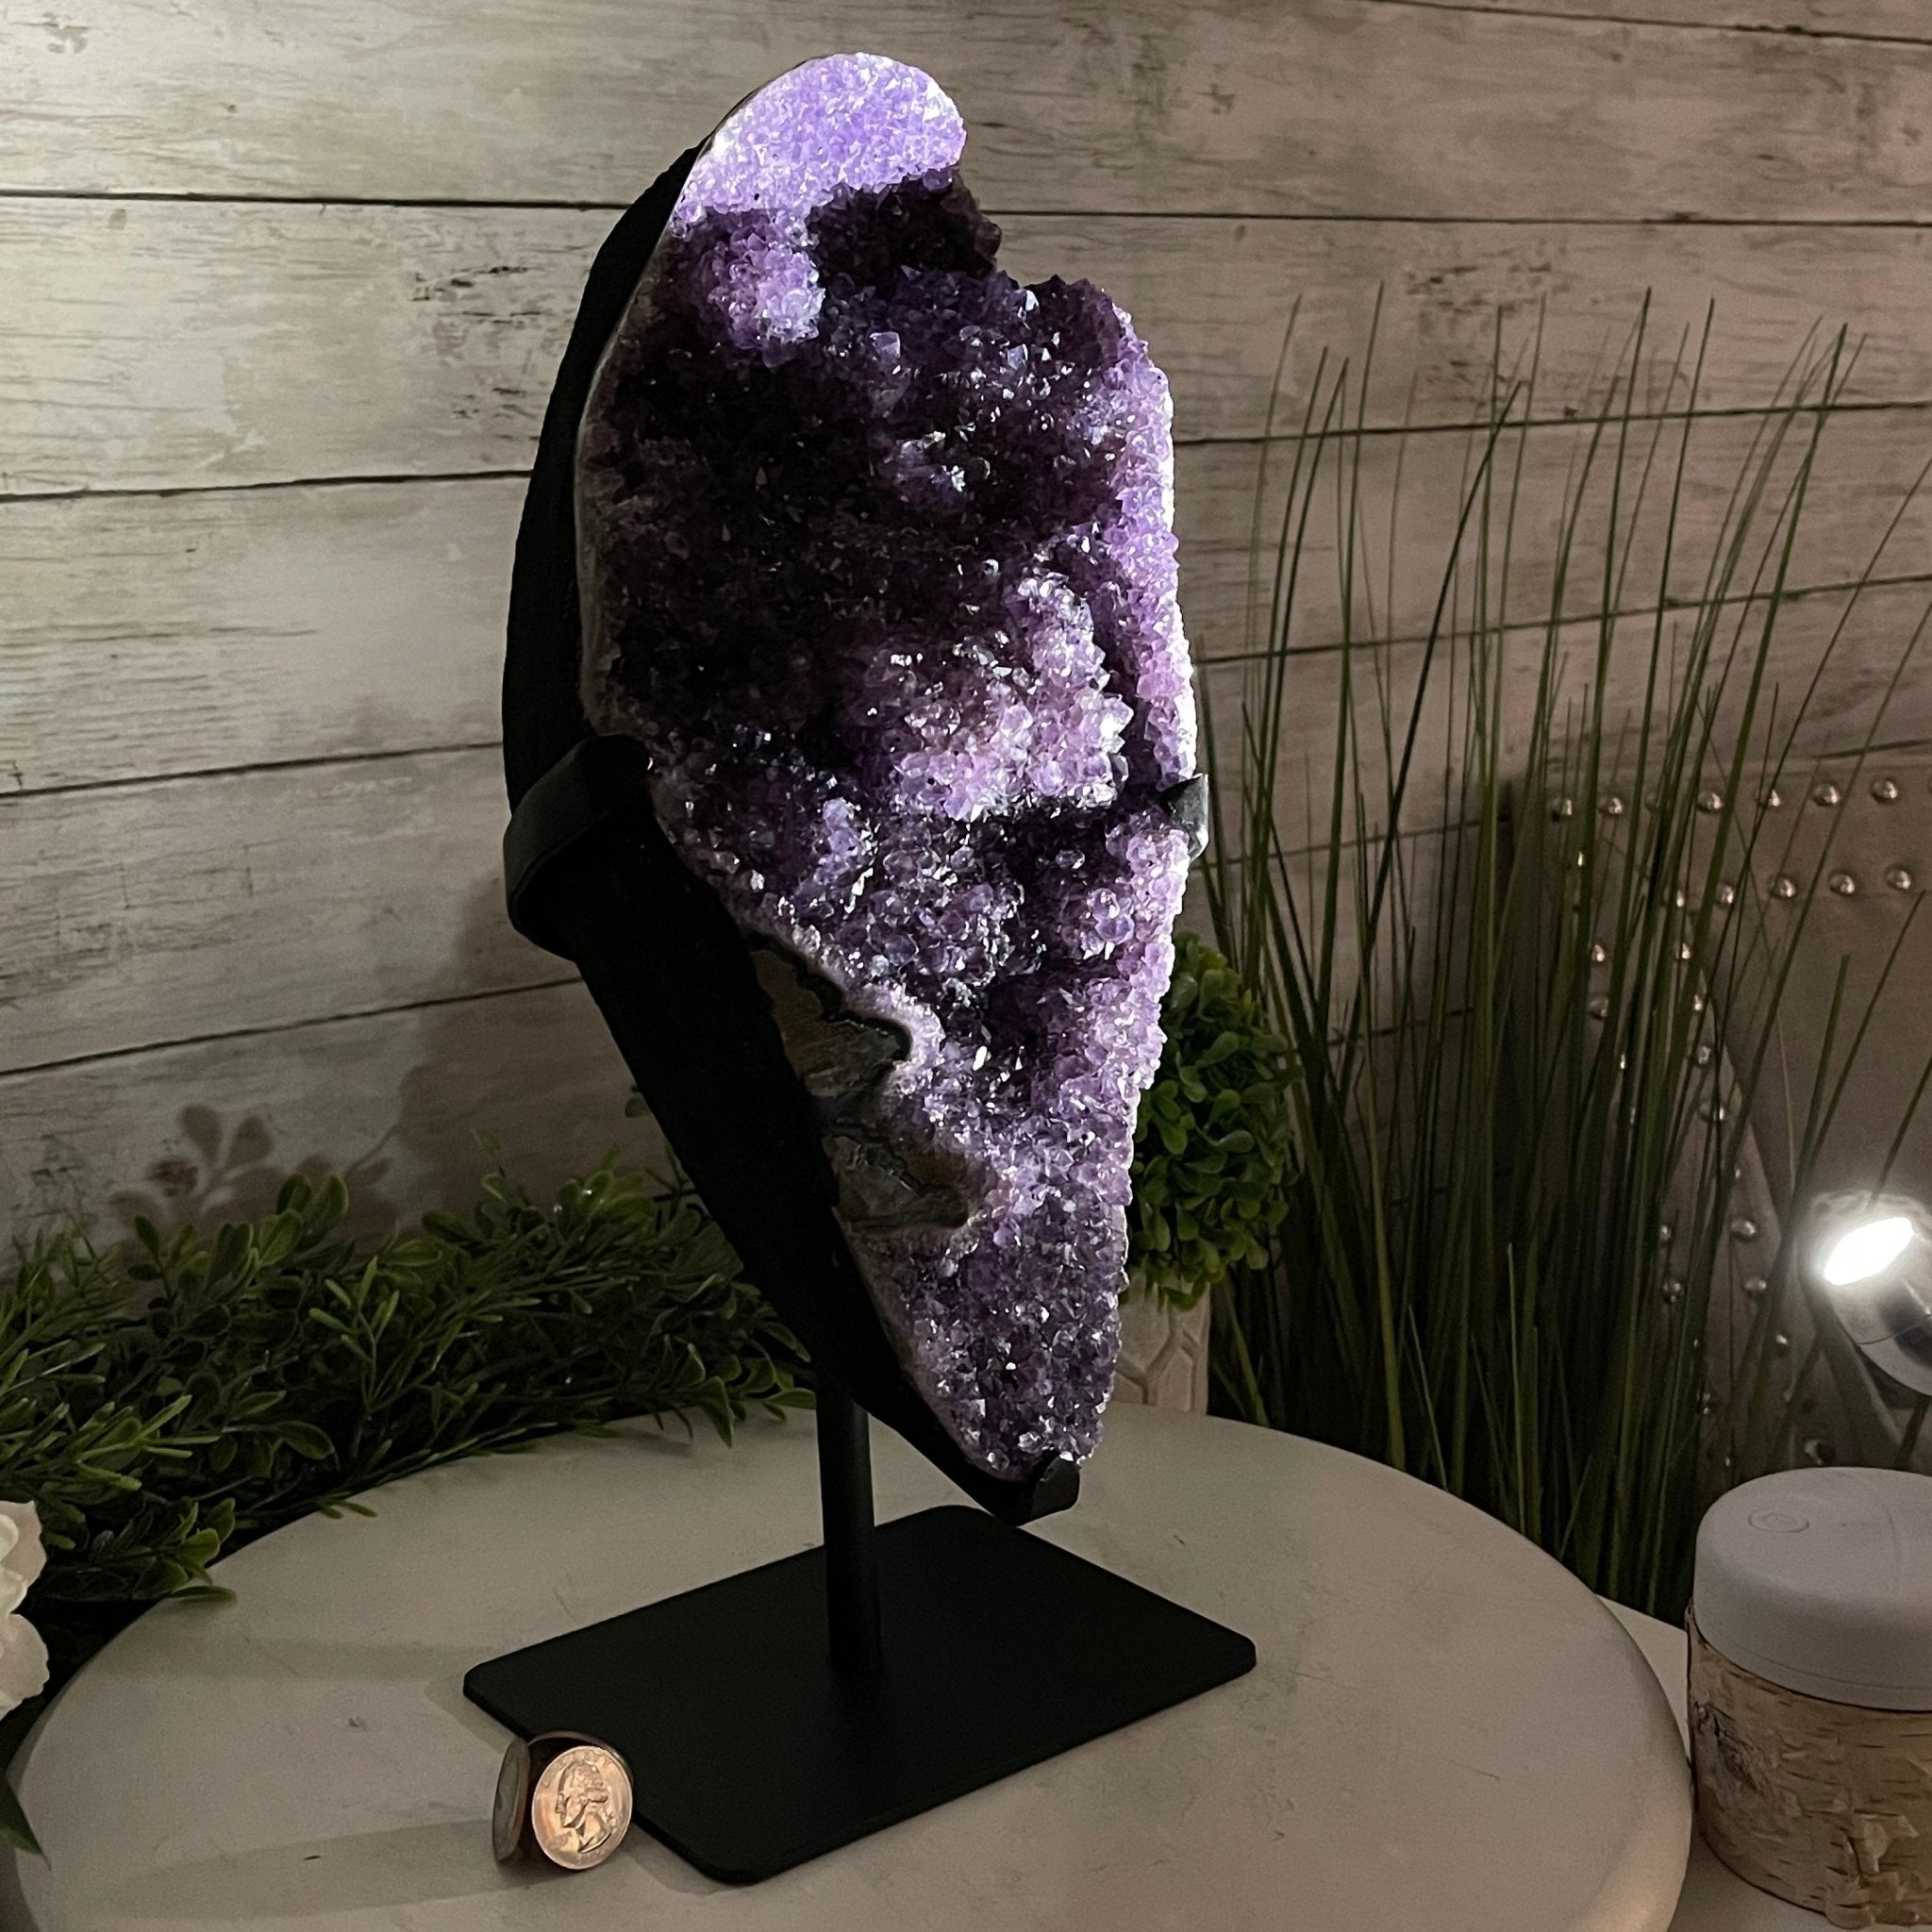 Extra Plus Quality Amethyst Druse Cluster on Metal Stand, 14.4 lbs & 14.25" tall #5491-0056 by Brazil Gems - Brazil GemsBrazil GemsExtra Plus Quality Amethyst Druse Cluster on Metal Stand, 14.4 lbs & 14.25" tall #5491-0056 by Brazil GemsClusters on Fixed Bases5491-0056